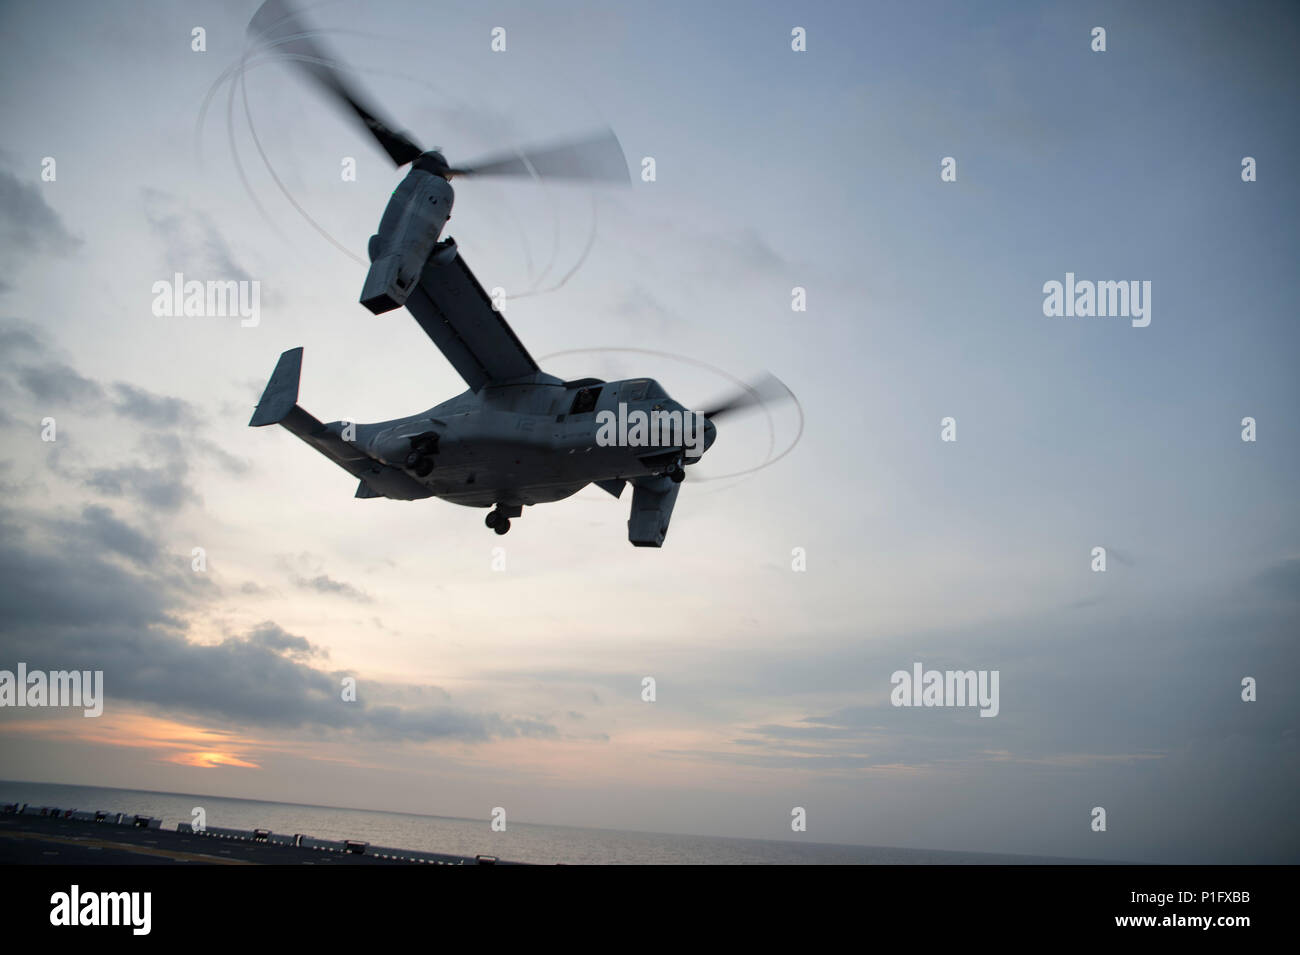 161022-N-XK809-024 SOUTH CHINA SEA (Oct. 22, 2016) An MV-22 Osprey, assigned to the Flying Tigers of Marine Medium Tiltrotor Squadron (VMM) 262, lands on the flight deck of amphibious assault ship USS Bonhomme Richard (LHD 6). Bonhomme Richard, flagship of the Bonhomme Richard Expeditionary Strike Group, is operating in the South China Sea in support of security and stability in the Indo-Asia Pacific region. (U.S. Navy photo by Petty Officer 3rd Class William Sykes/Released) Stock Photo